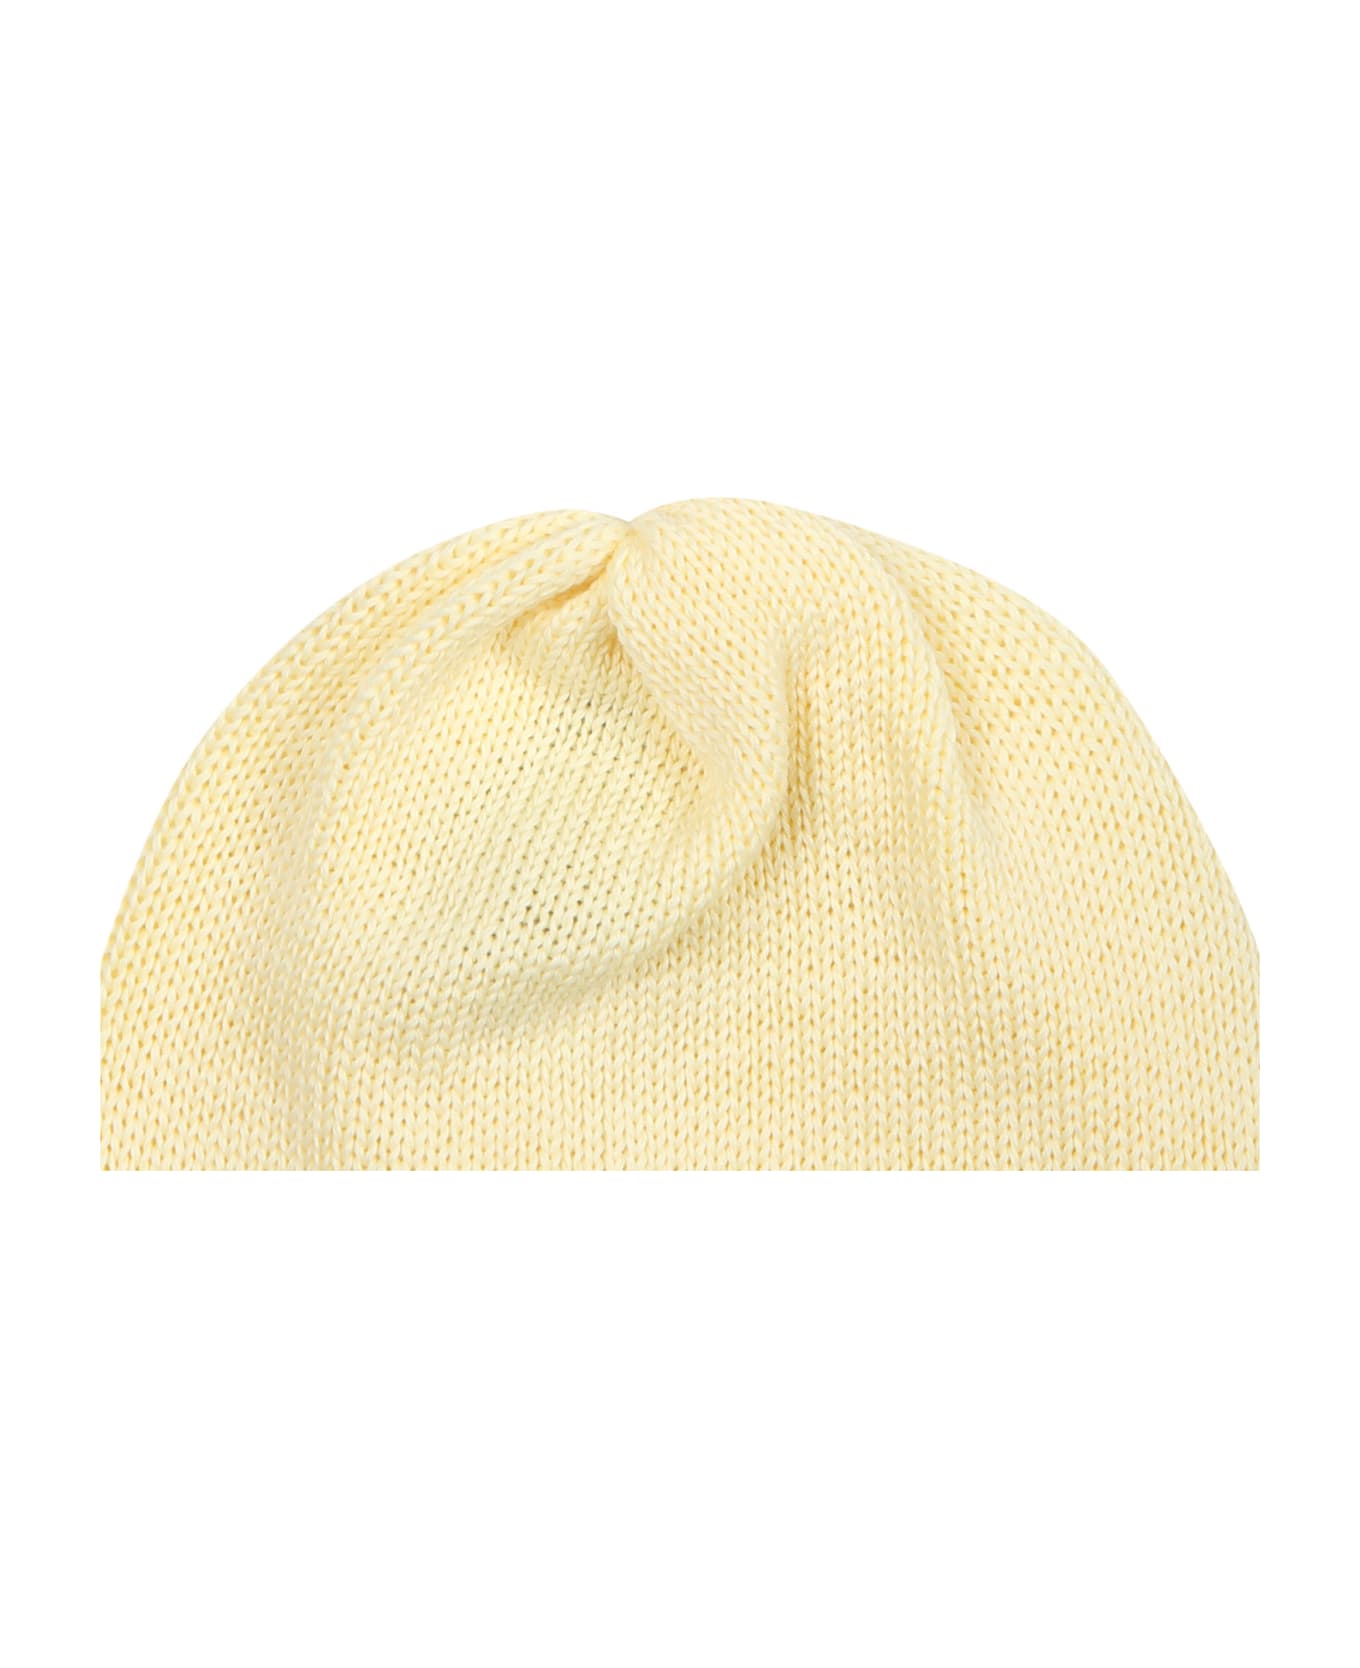 Little Bear Yellow Hat For Baby Kids - Yellow アクセサリー＆ギフト